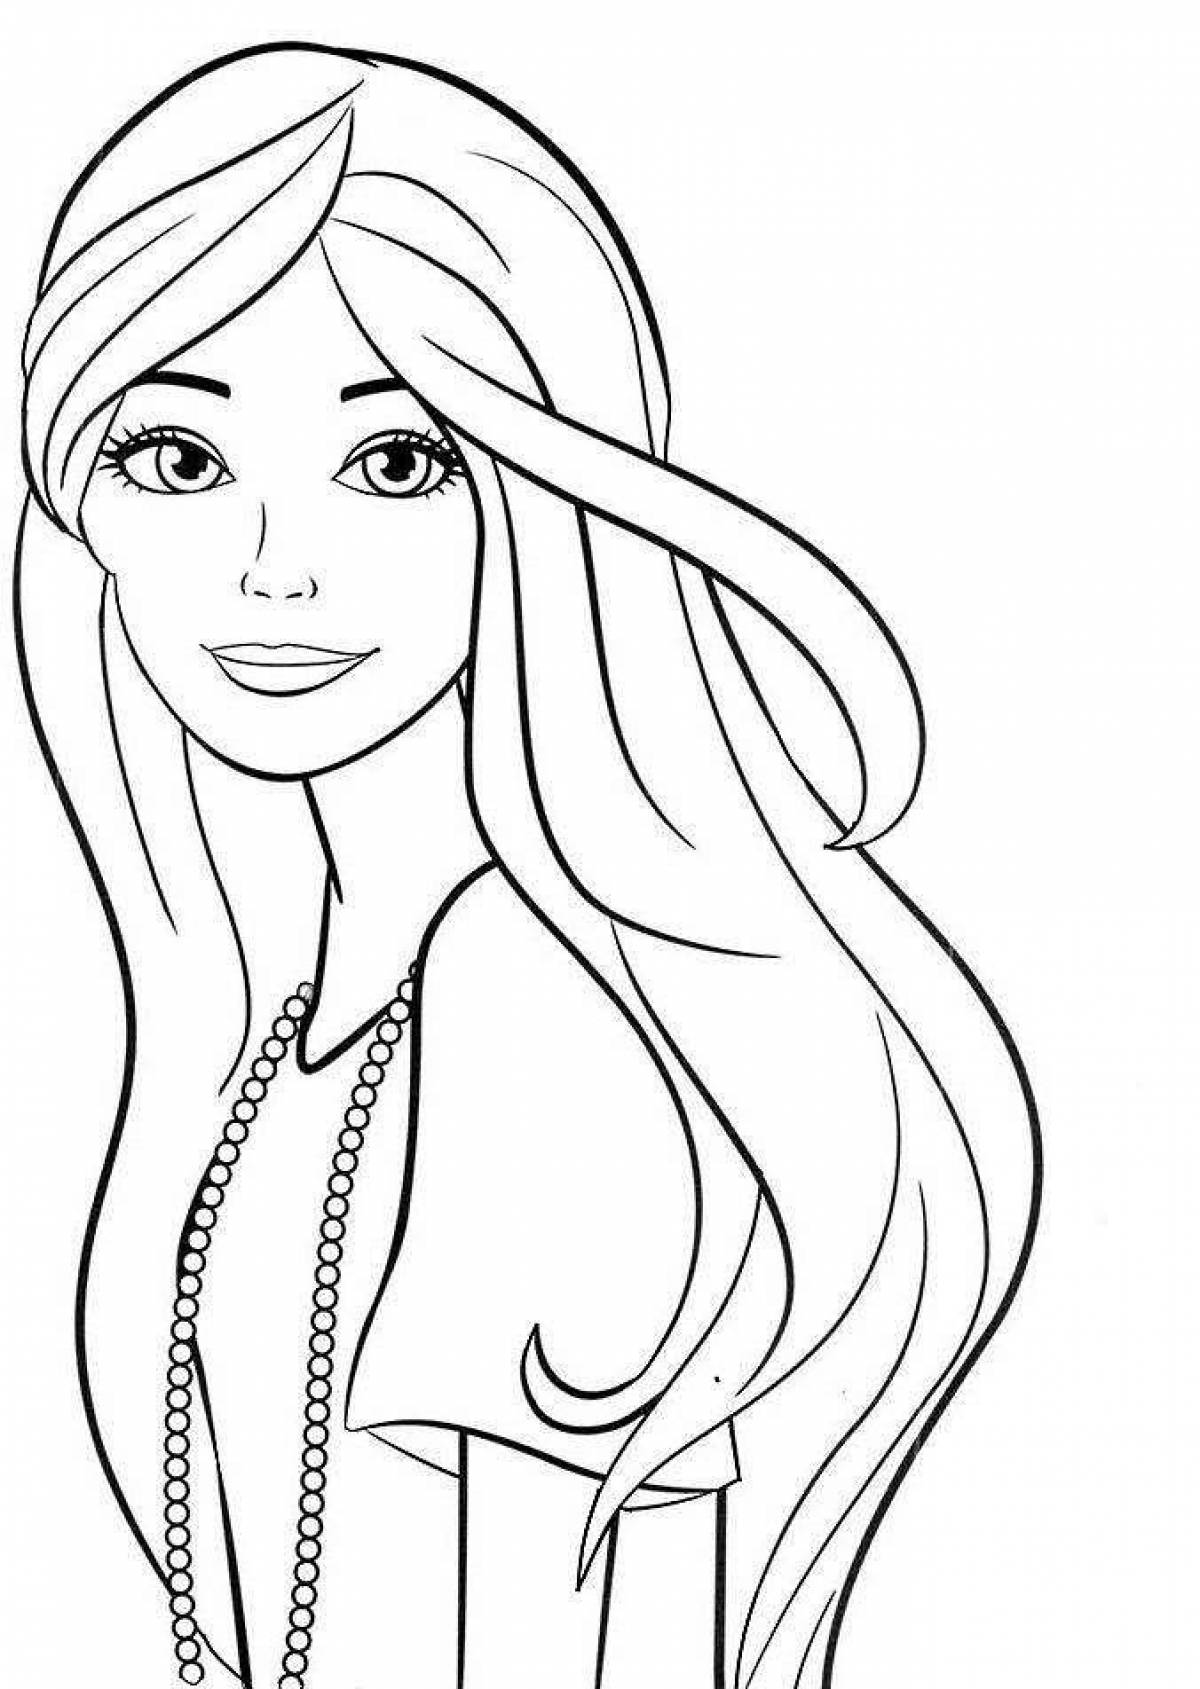 Black and white live coloring for girls